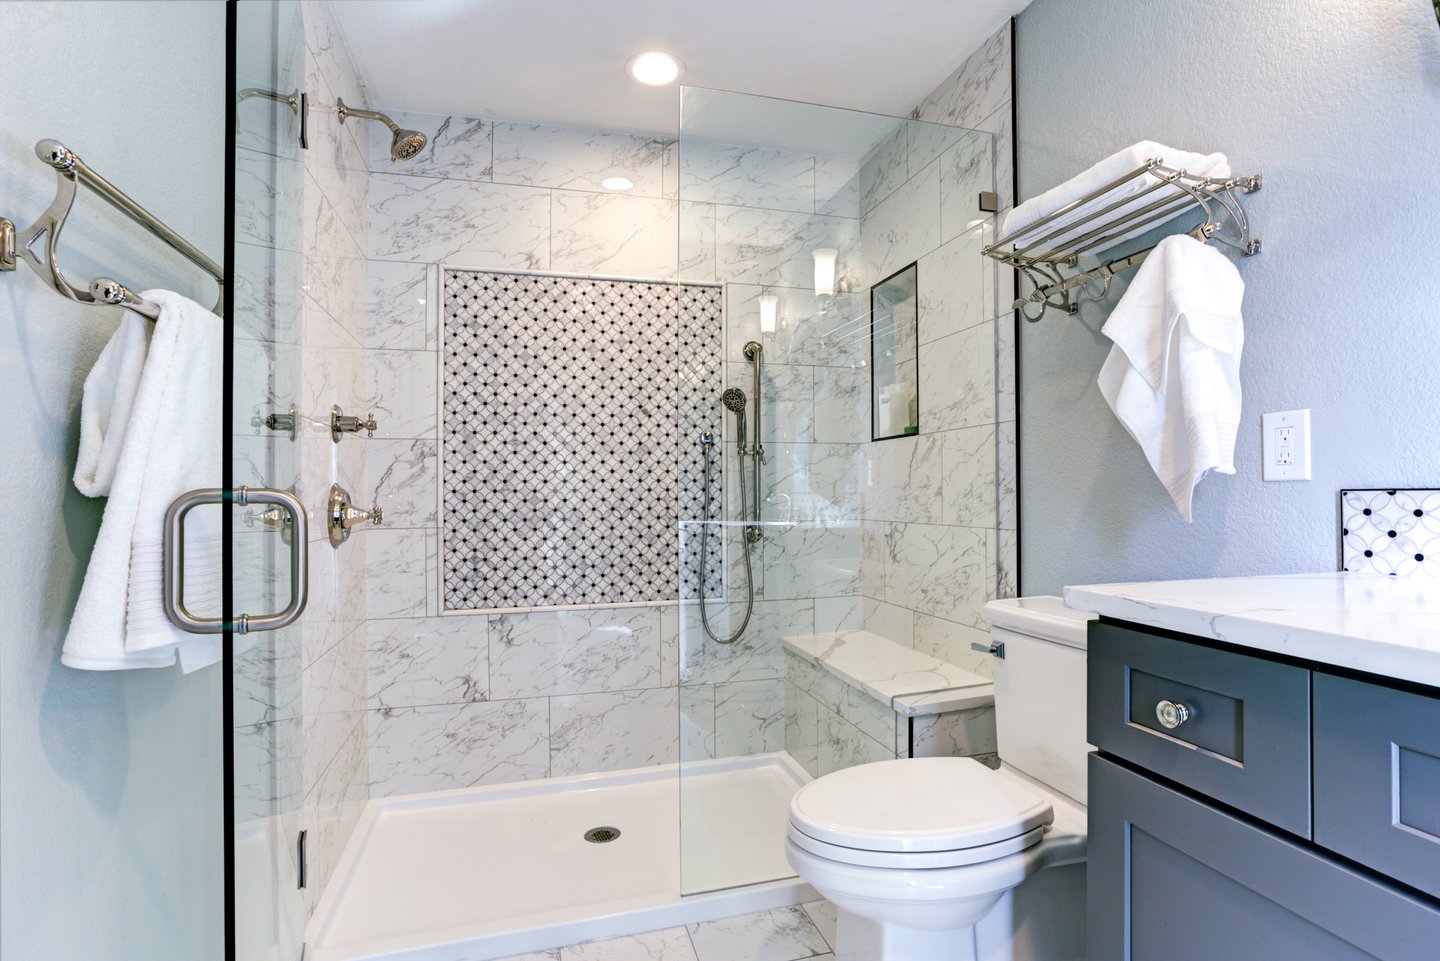 3 Shower Tile Ideas To Use in Your Next Bathroom Remodel